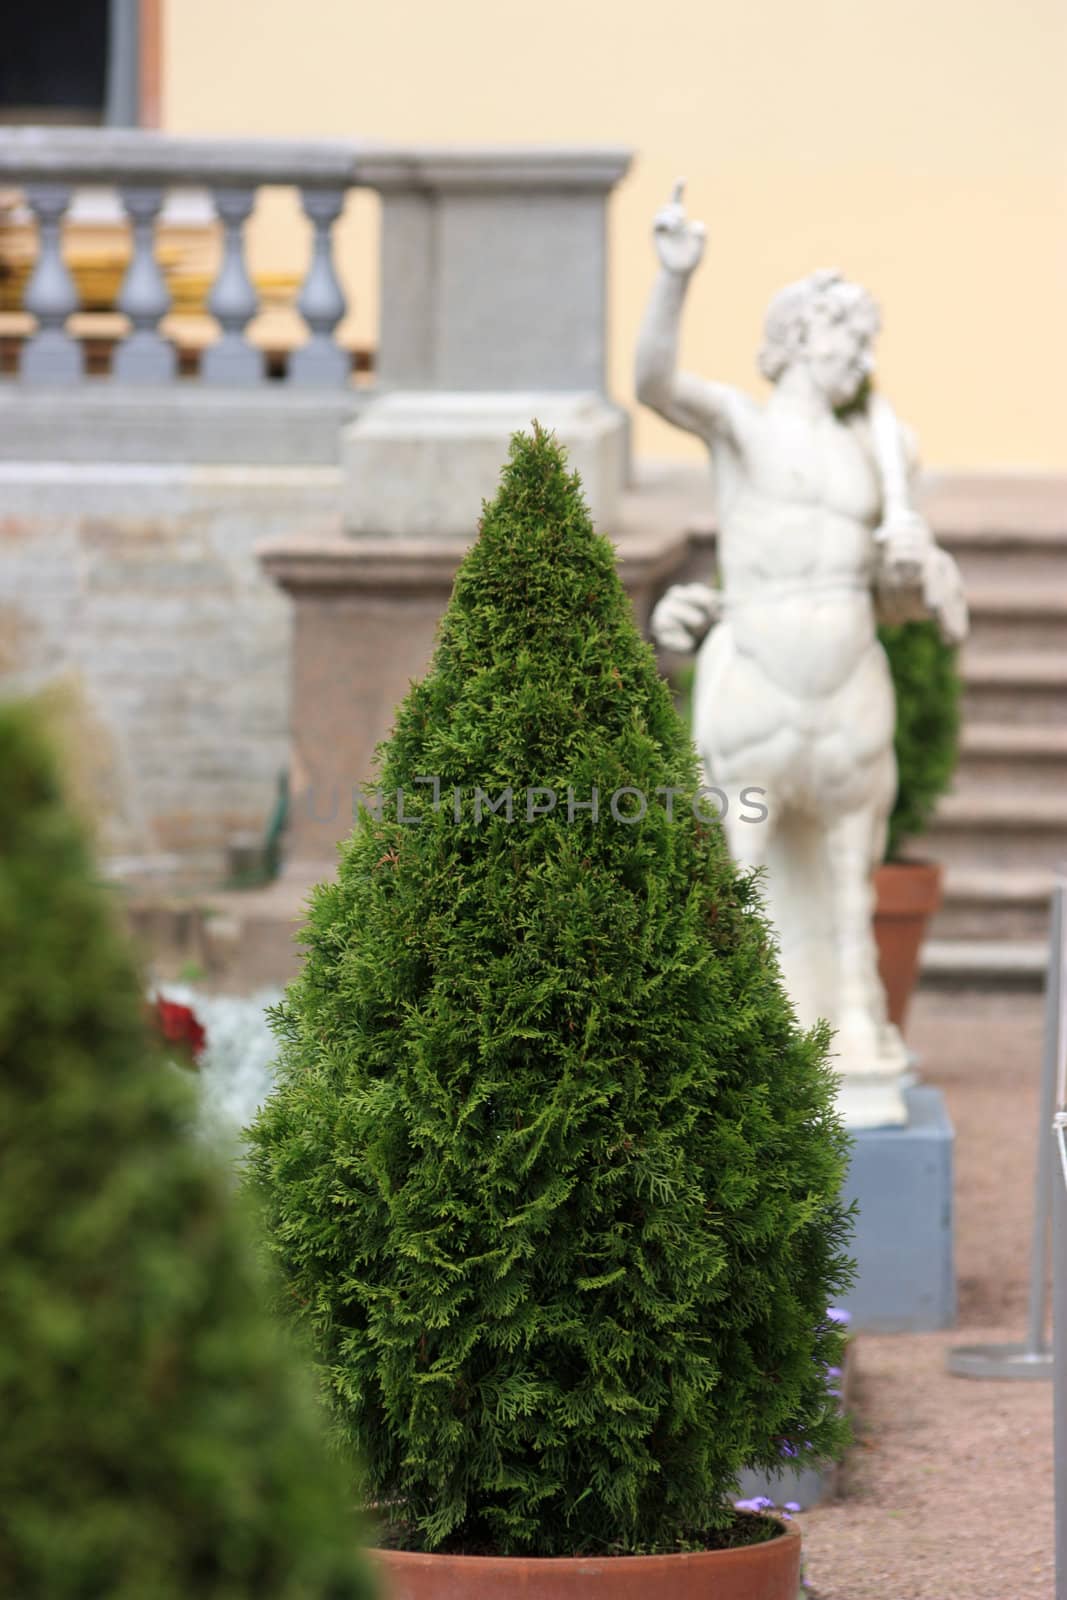 ornamental tree cone amid statues and banisters by solovv